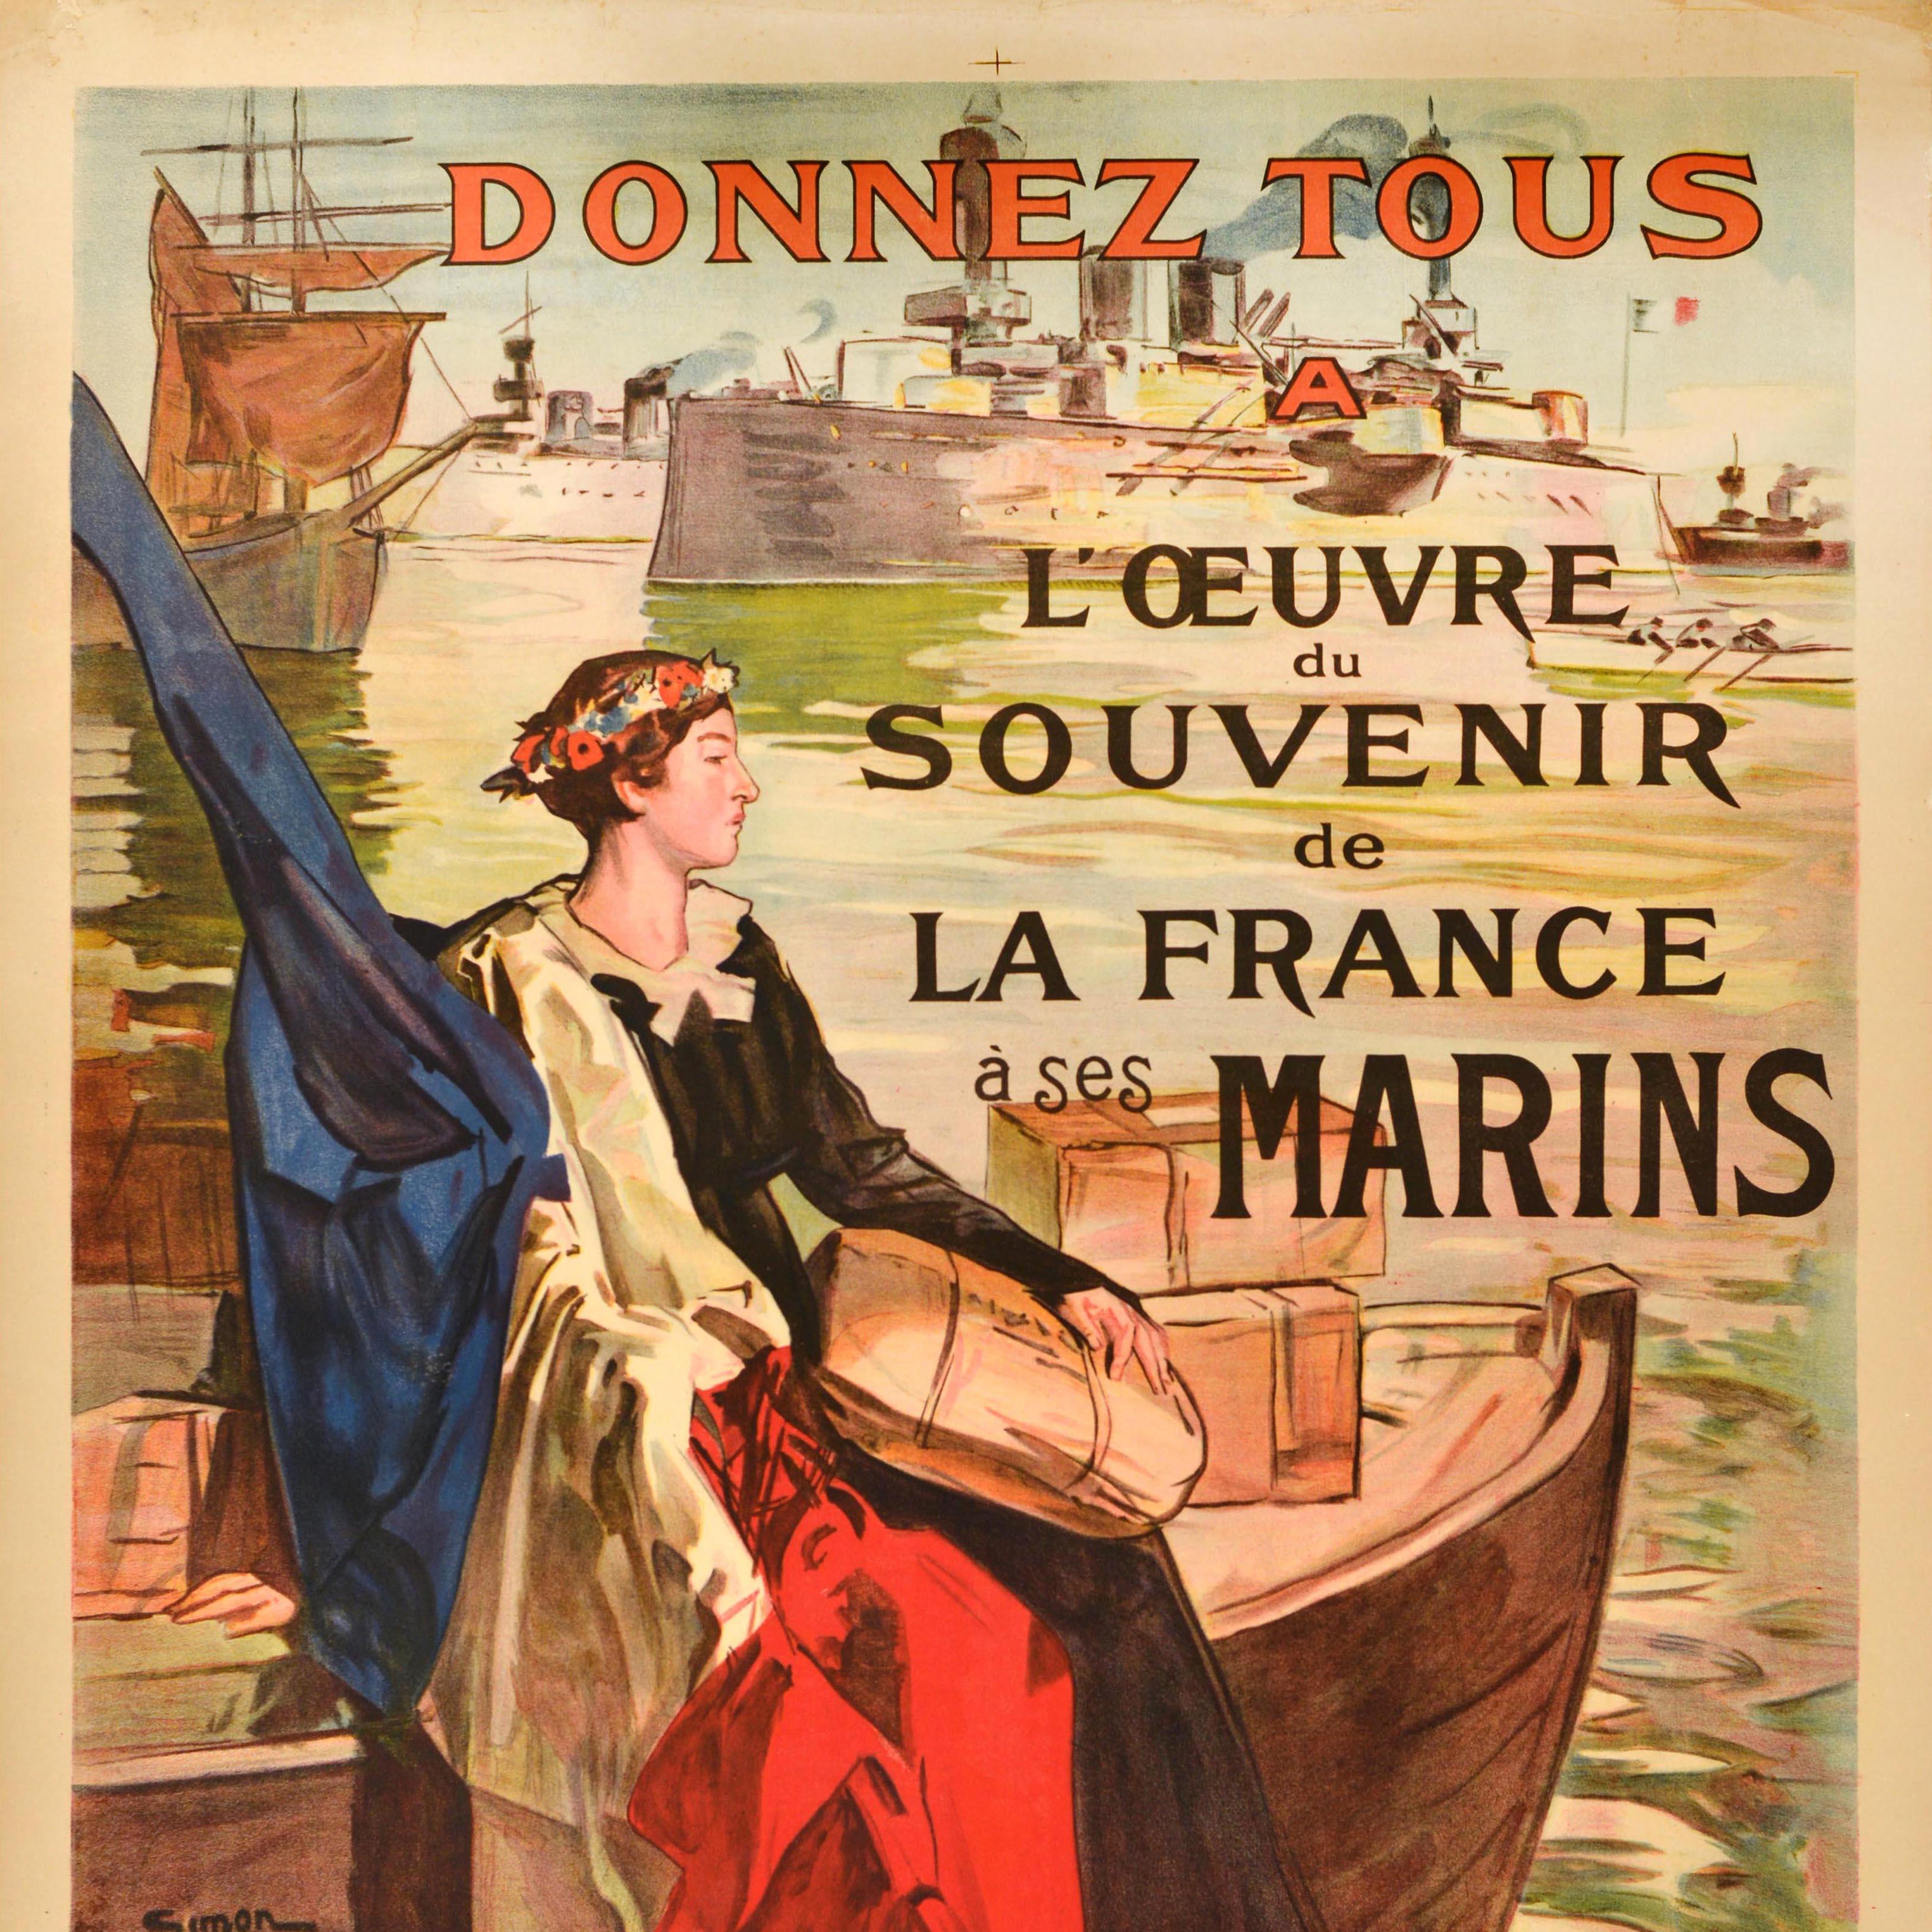 Original antique fundraising poster commemorating French sailors and promoting donations - Donnes tous a l'oeuvre du souvenir de la France a ses Marins / Everyone give to the fund in remembrance of the French sailors - featuring an illustration by